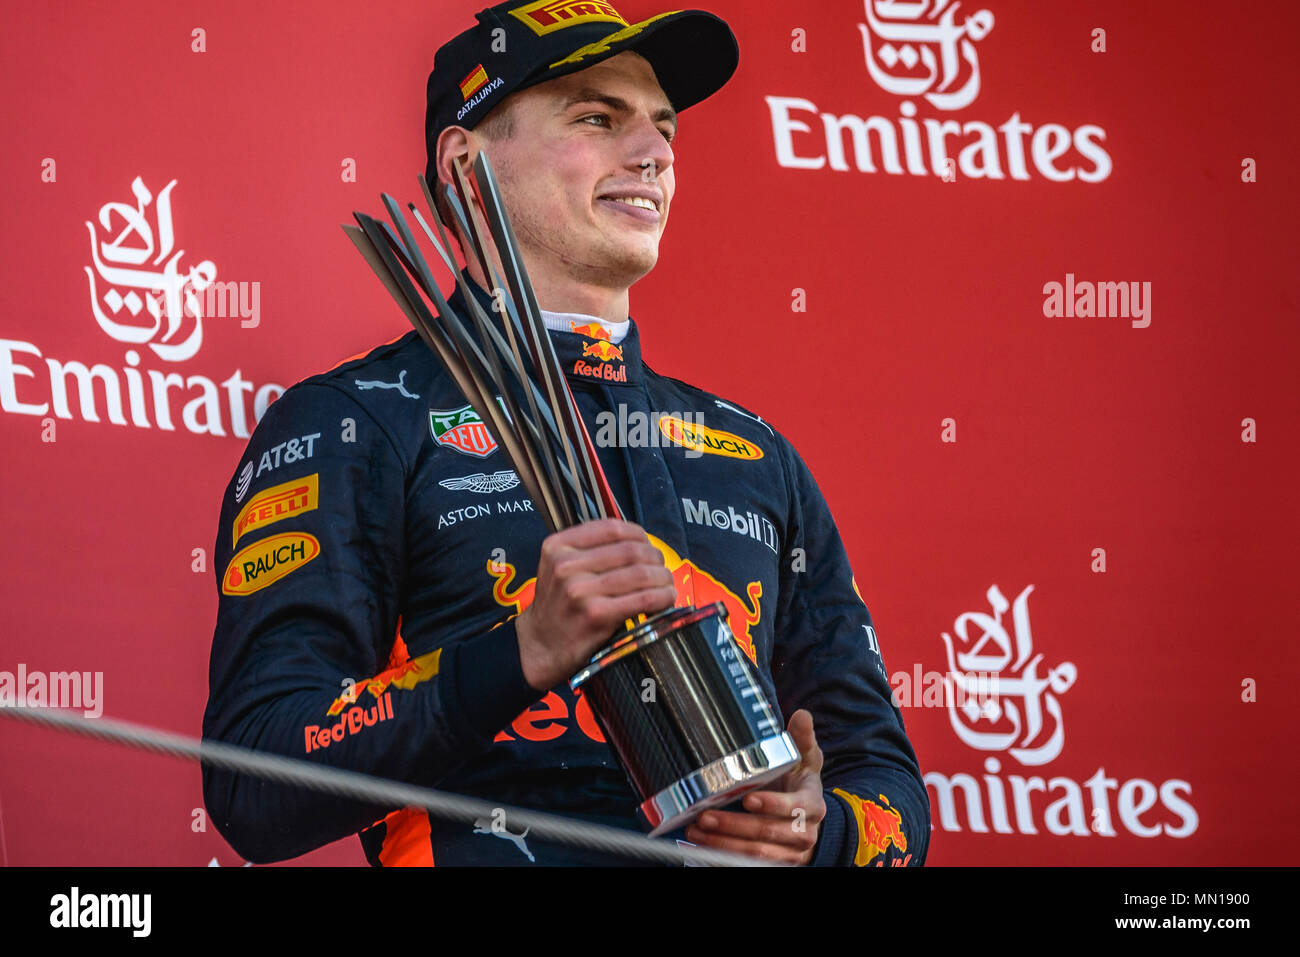 Barcelona, Spain. 13 May, 2018:  MAX VERSTAPPEN (NED), Red Bull Racing, celebrates his 3rd place at the podium  after getting third at the Spanish GP at Circuit de Barcelona - Catalunya Credit: Matthias Oesterle/Alamy Live News Stock Photo